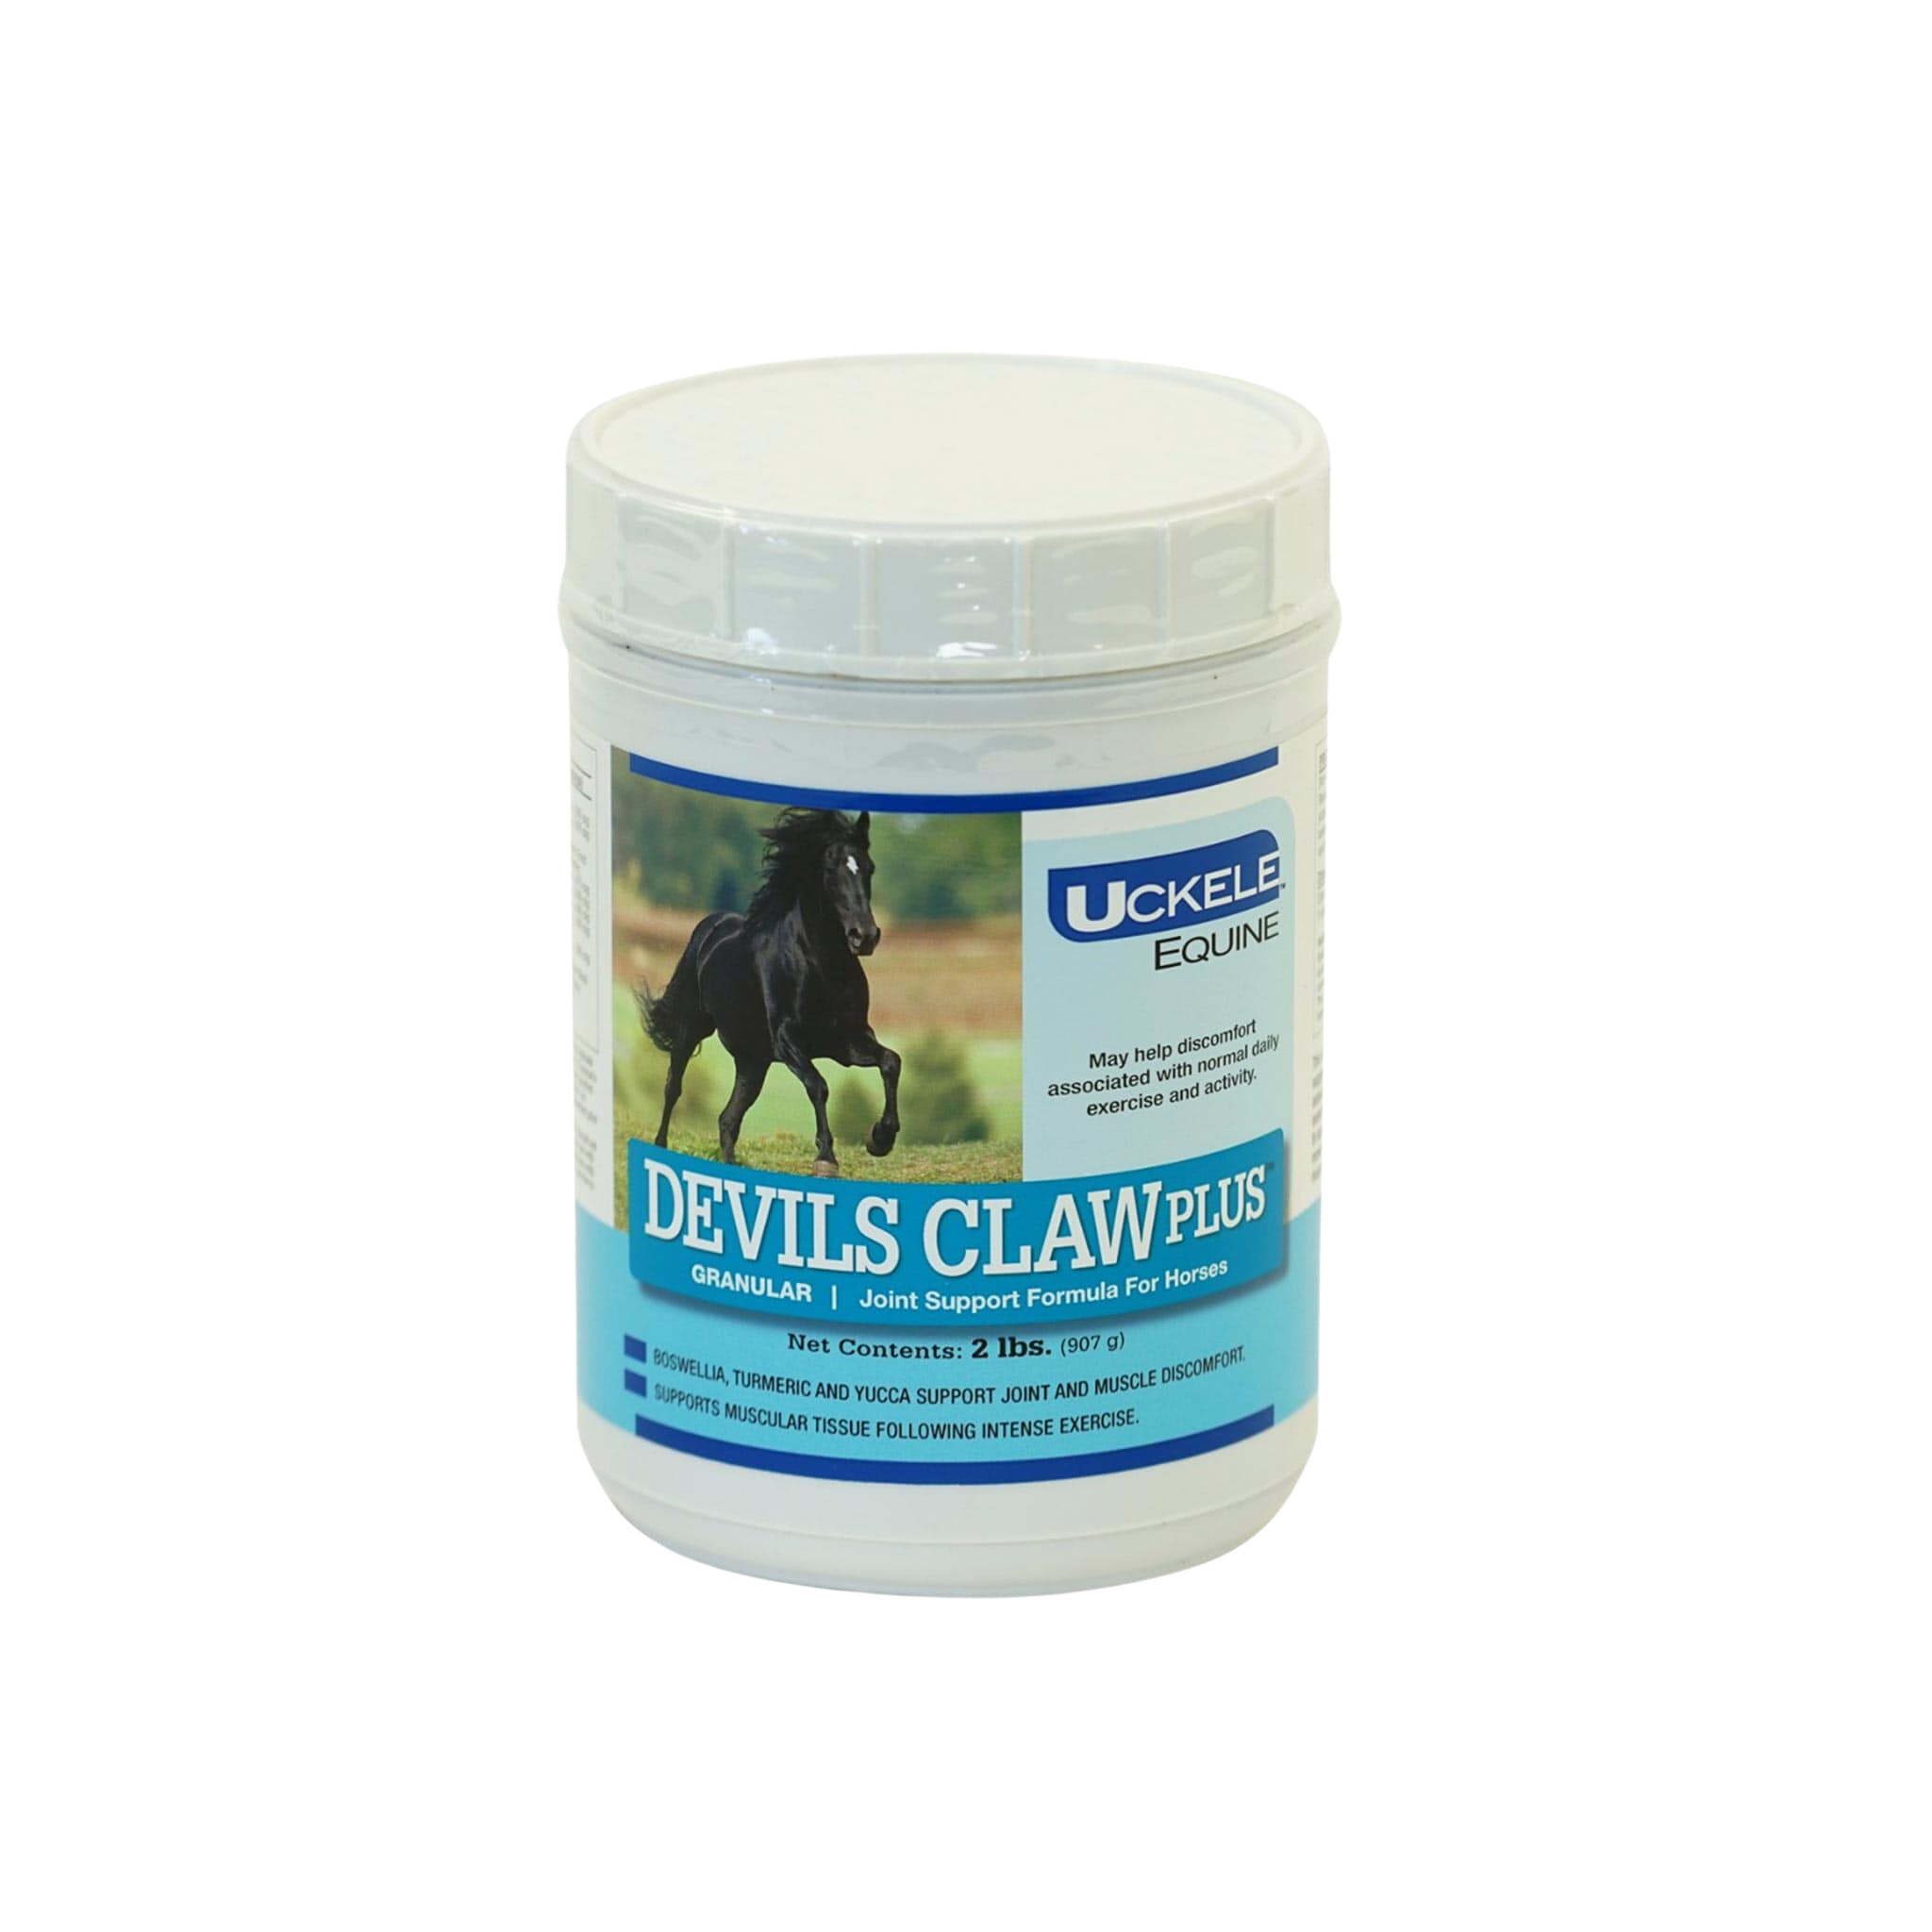 Uckele Equine Devils Claw Plus Joint Support Granulated Supplement - Corro